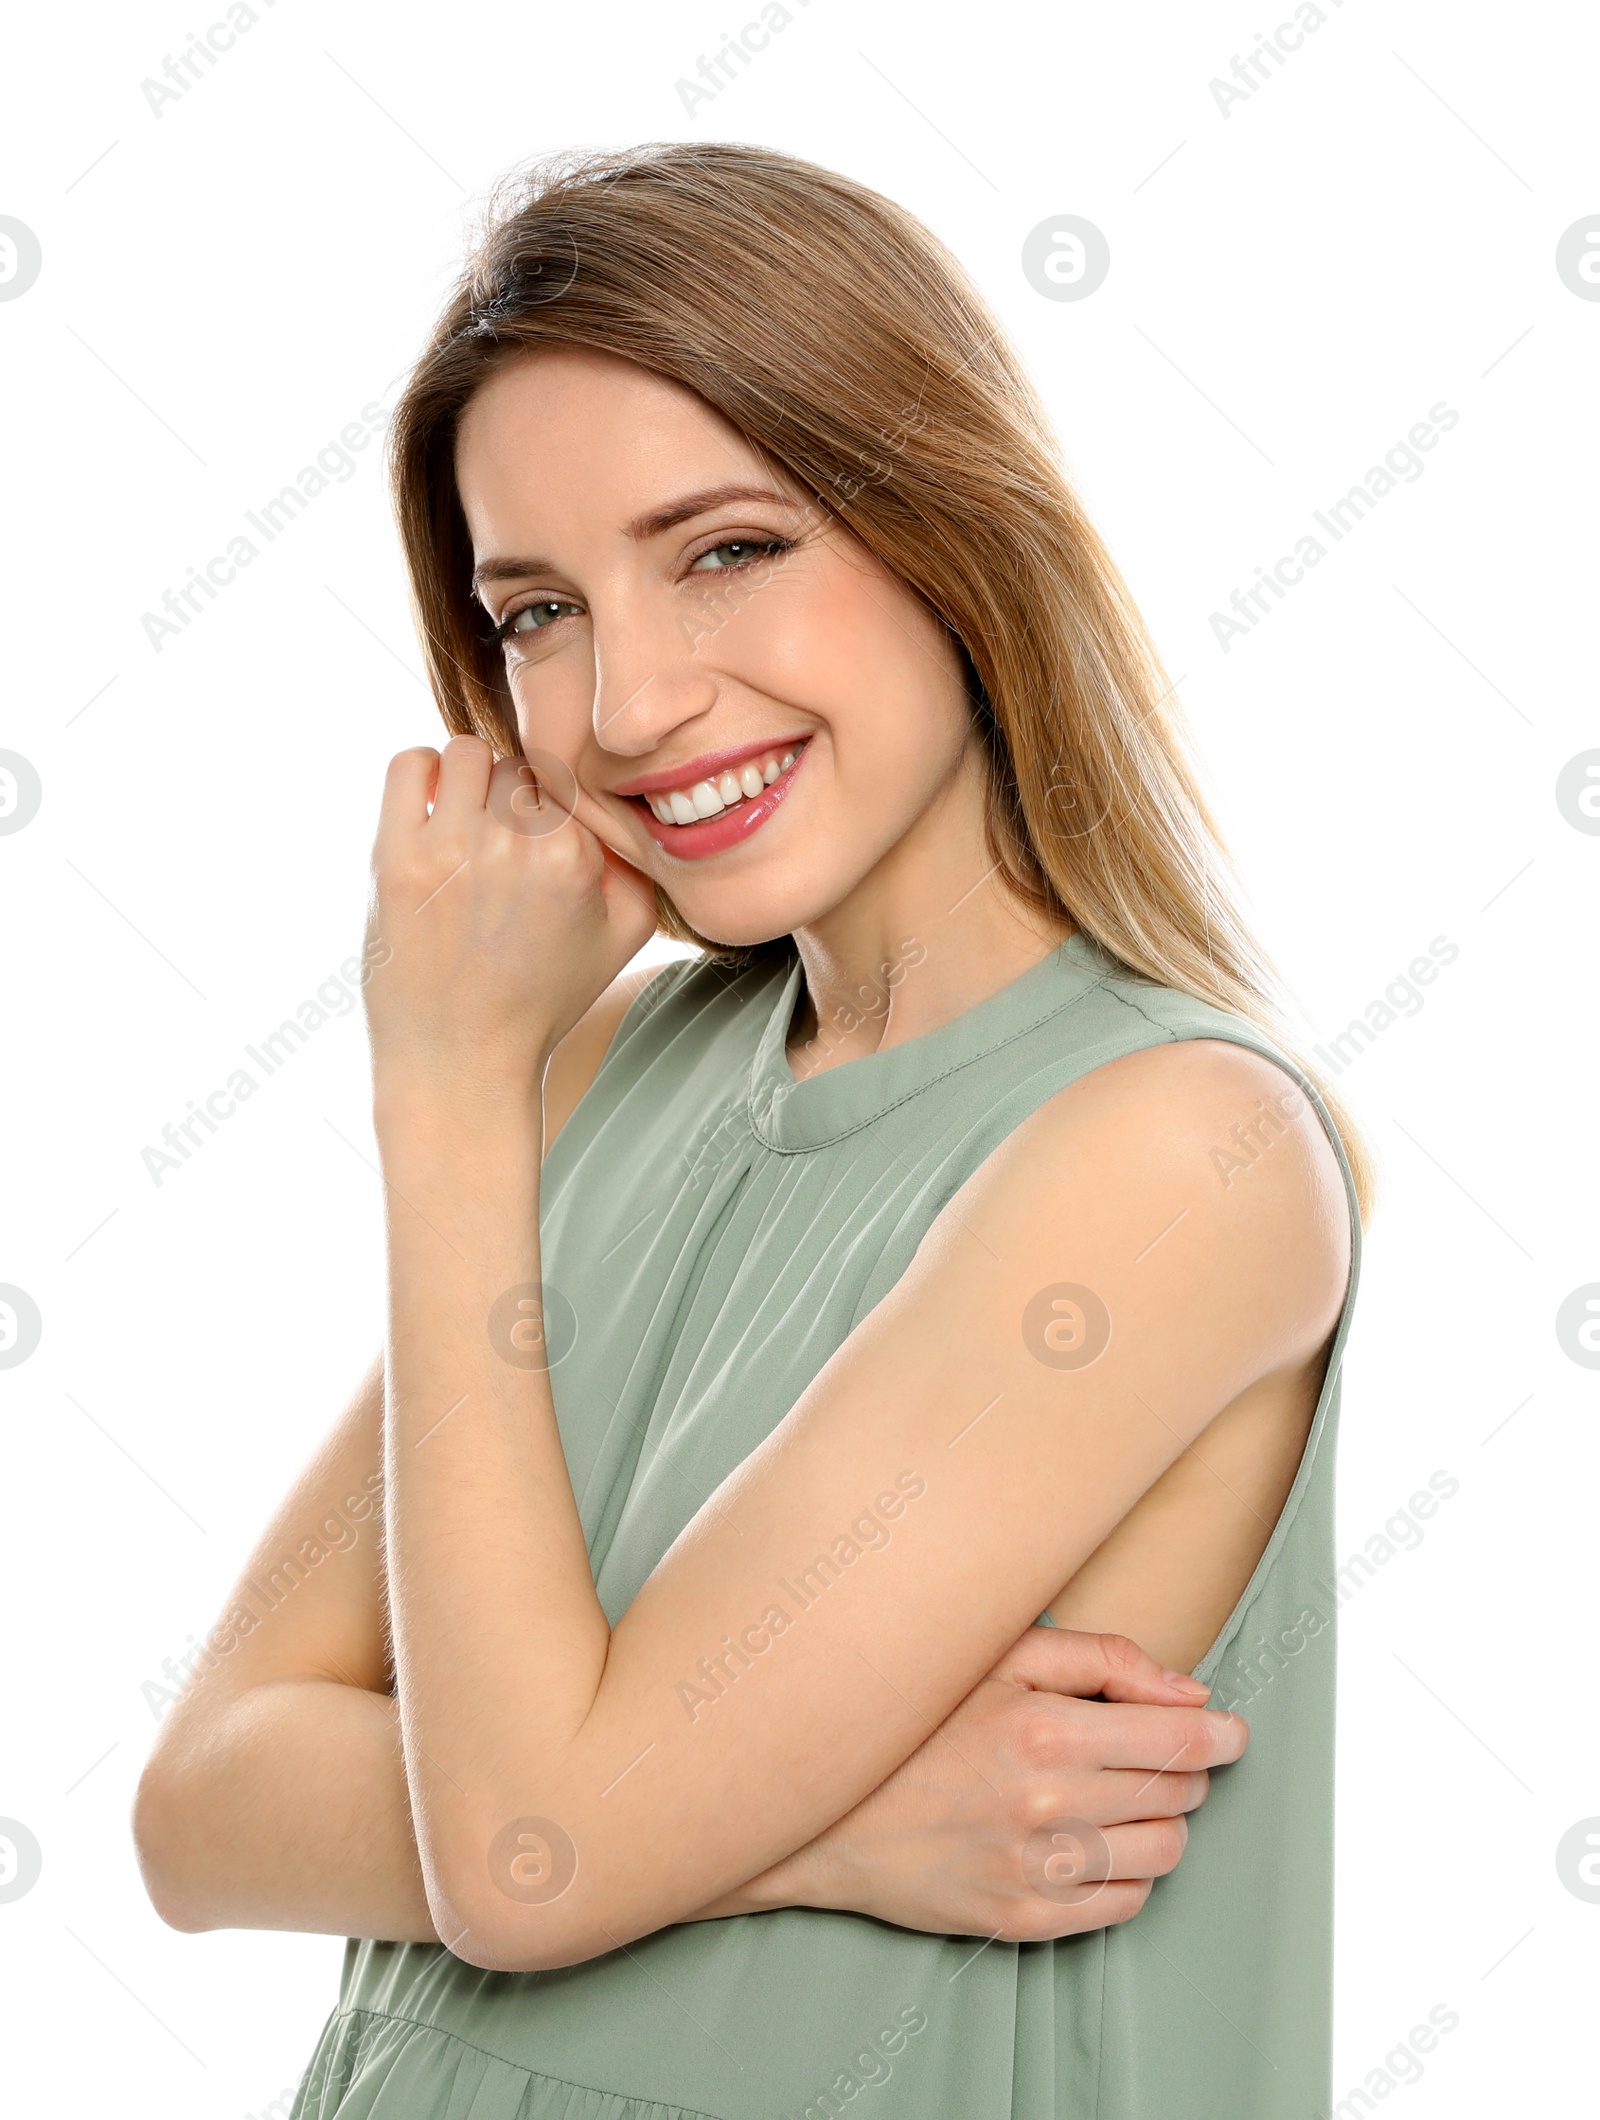 Photo of Portrait of young woman with beautiful face on white background